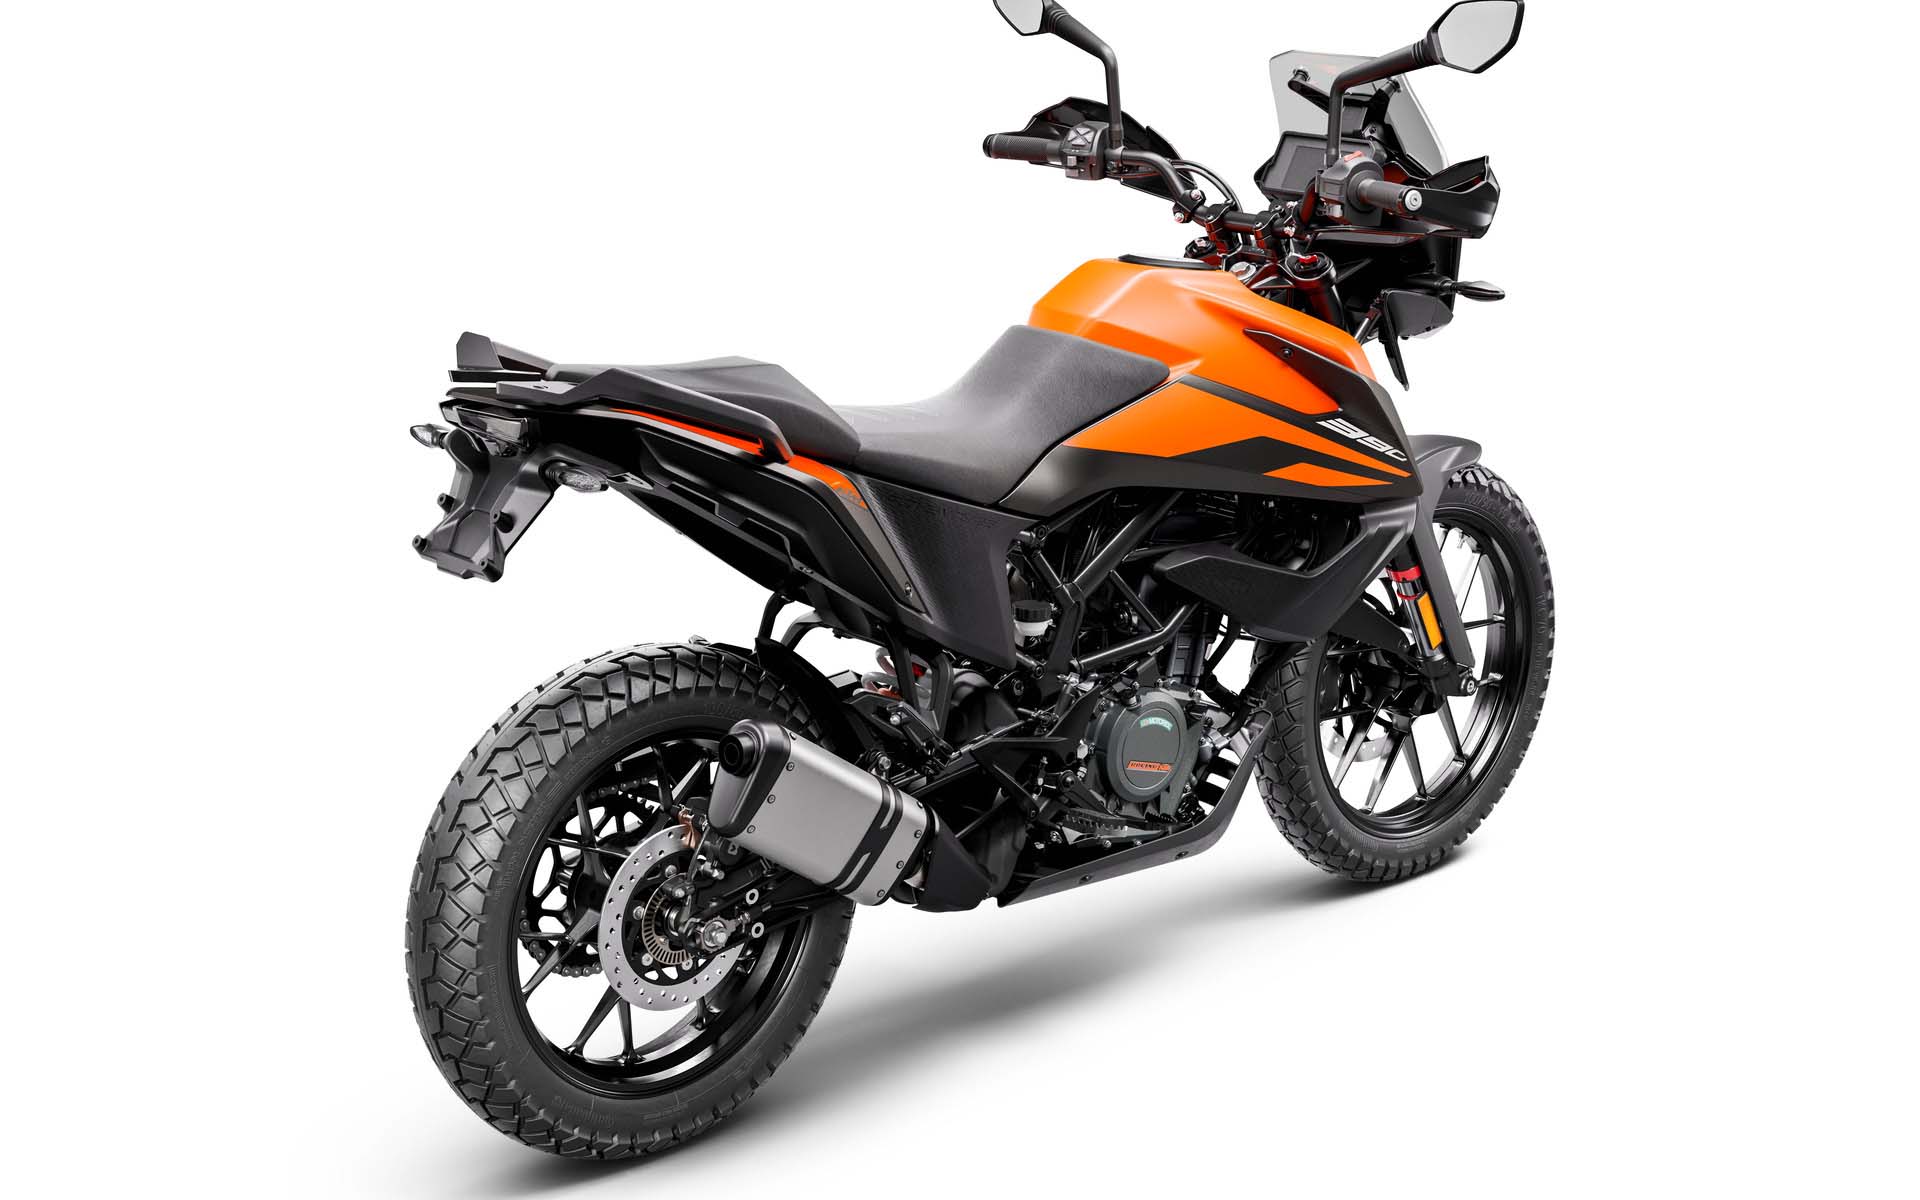 KTM 390 Adventure. USA Market Price & Delivery Date | DriveMag Riders